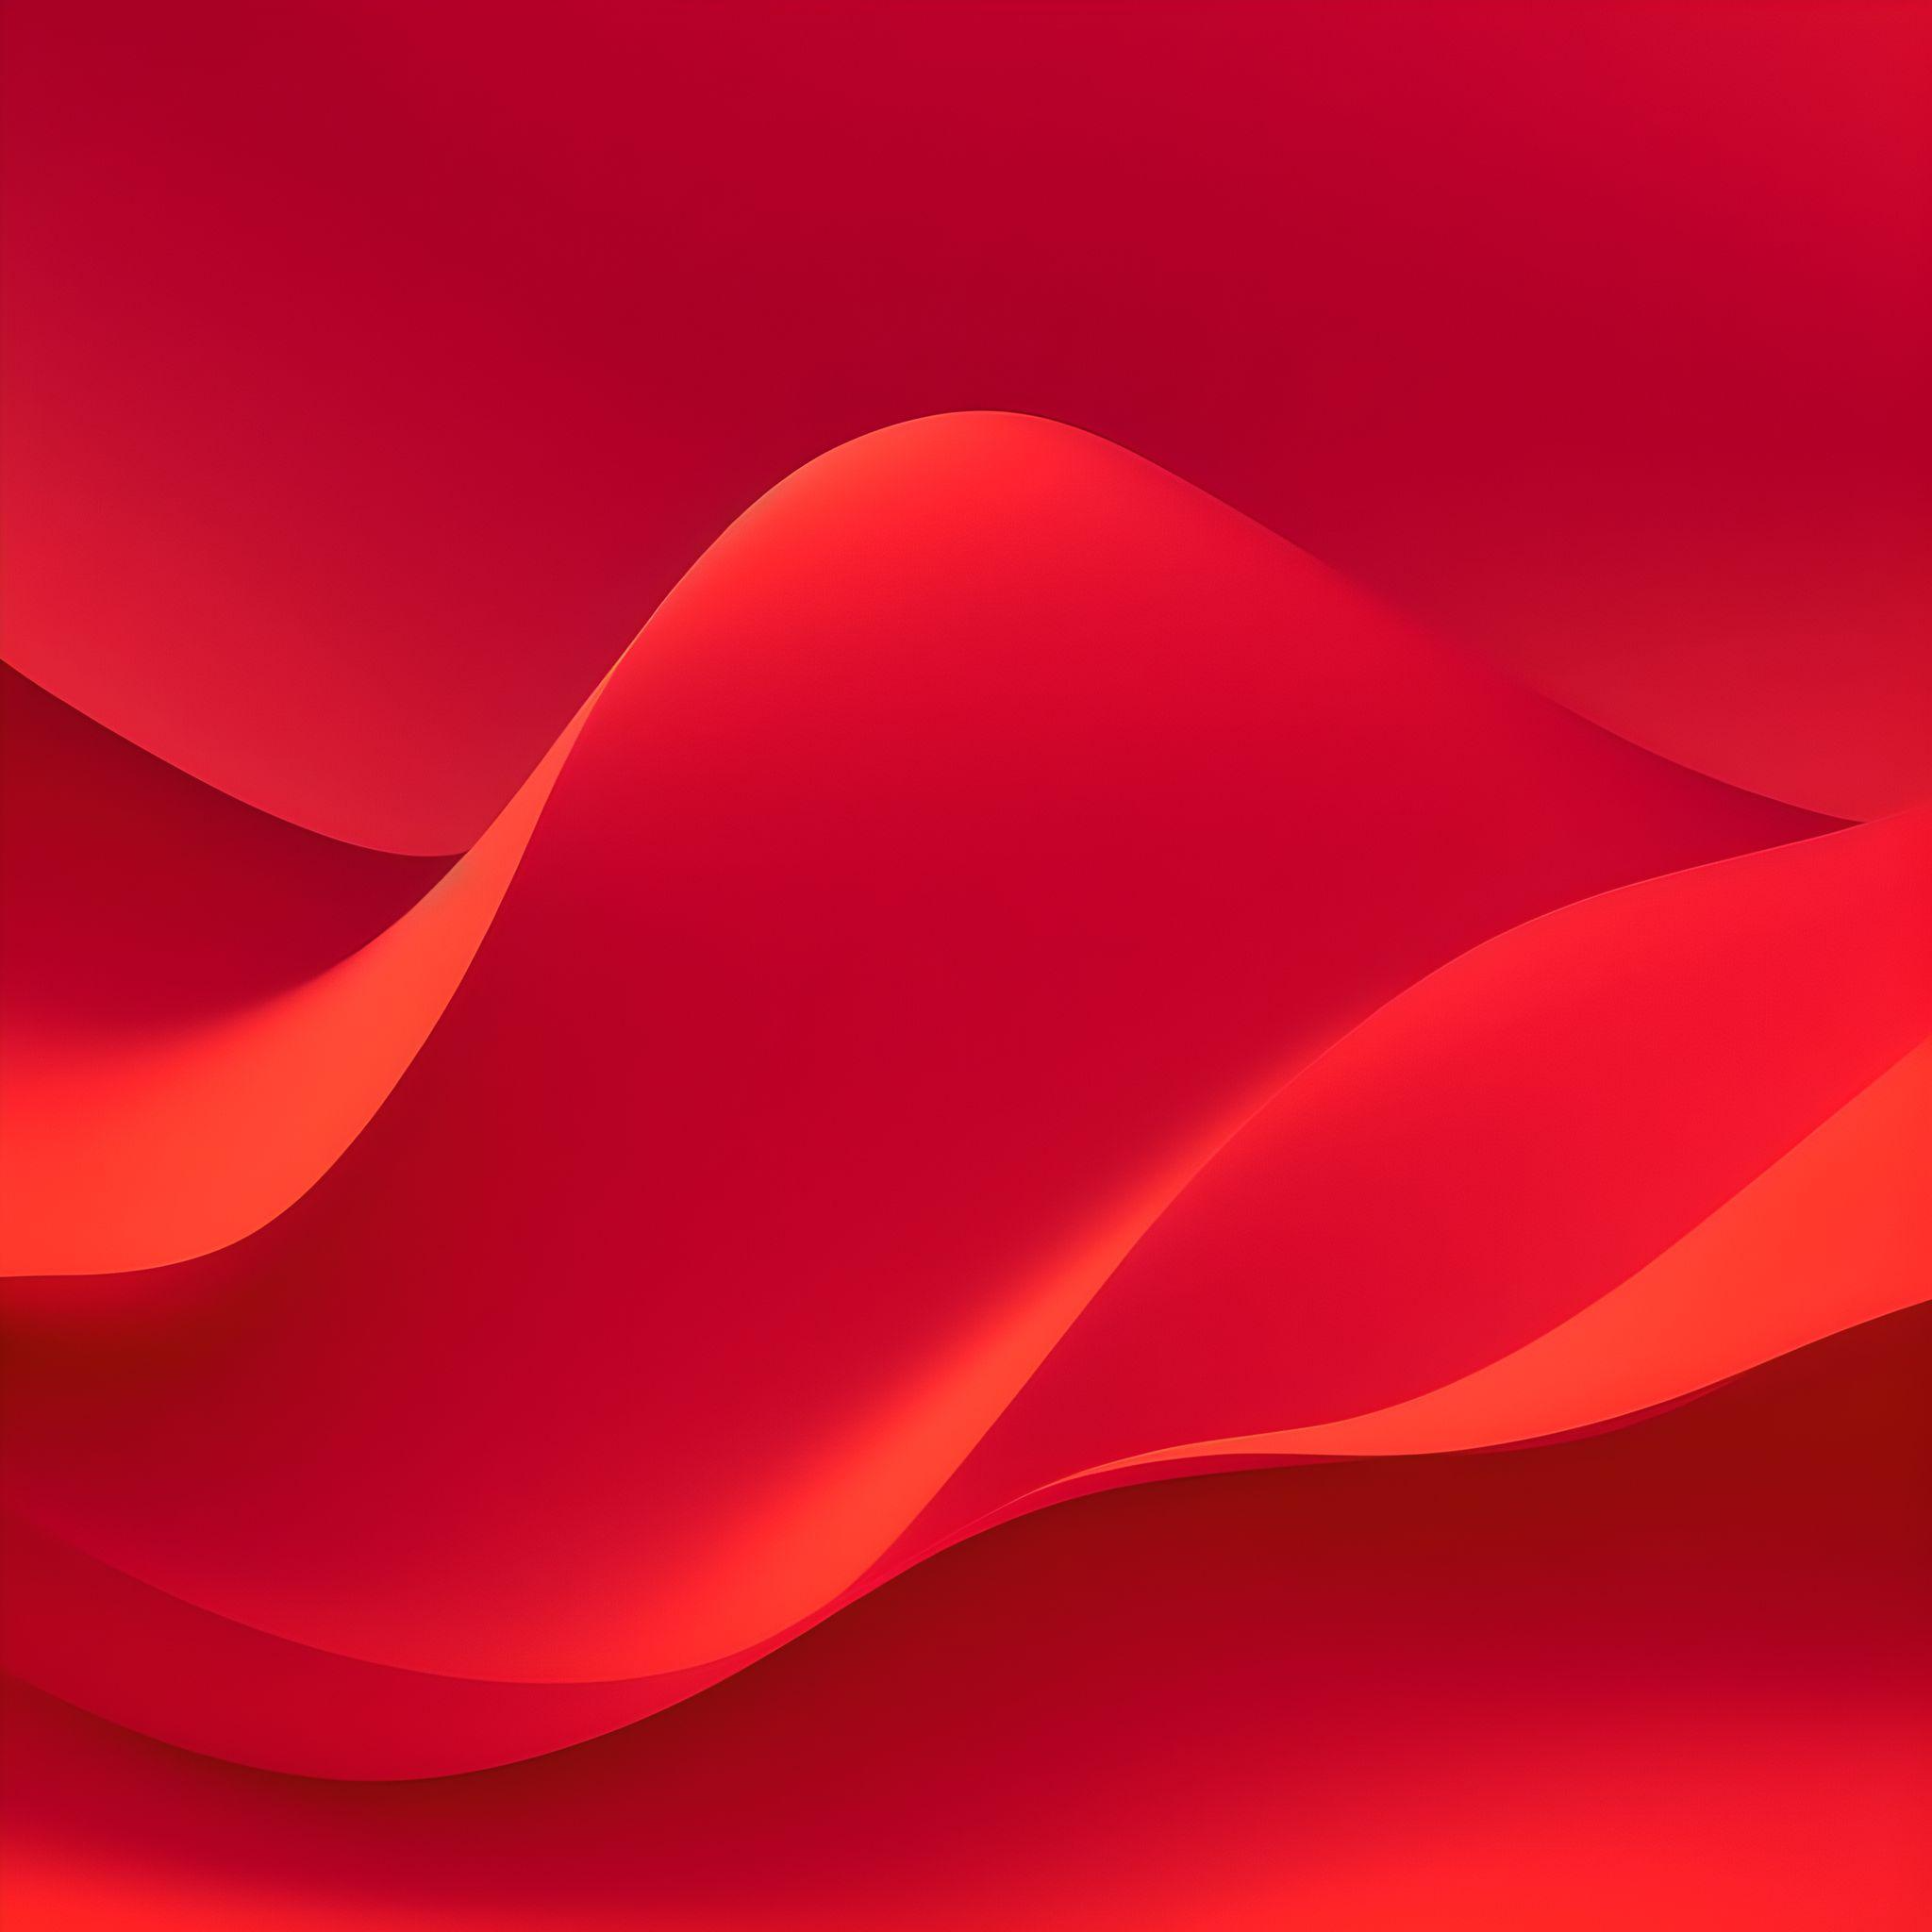 red background images hd